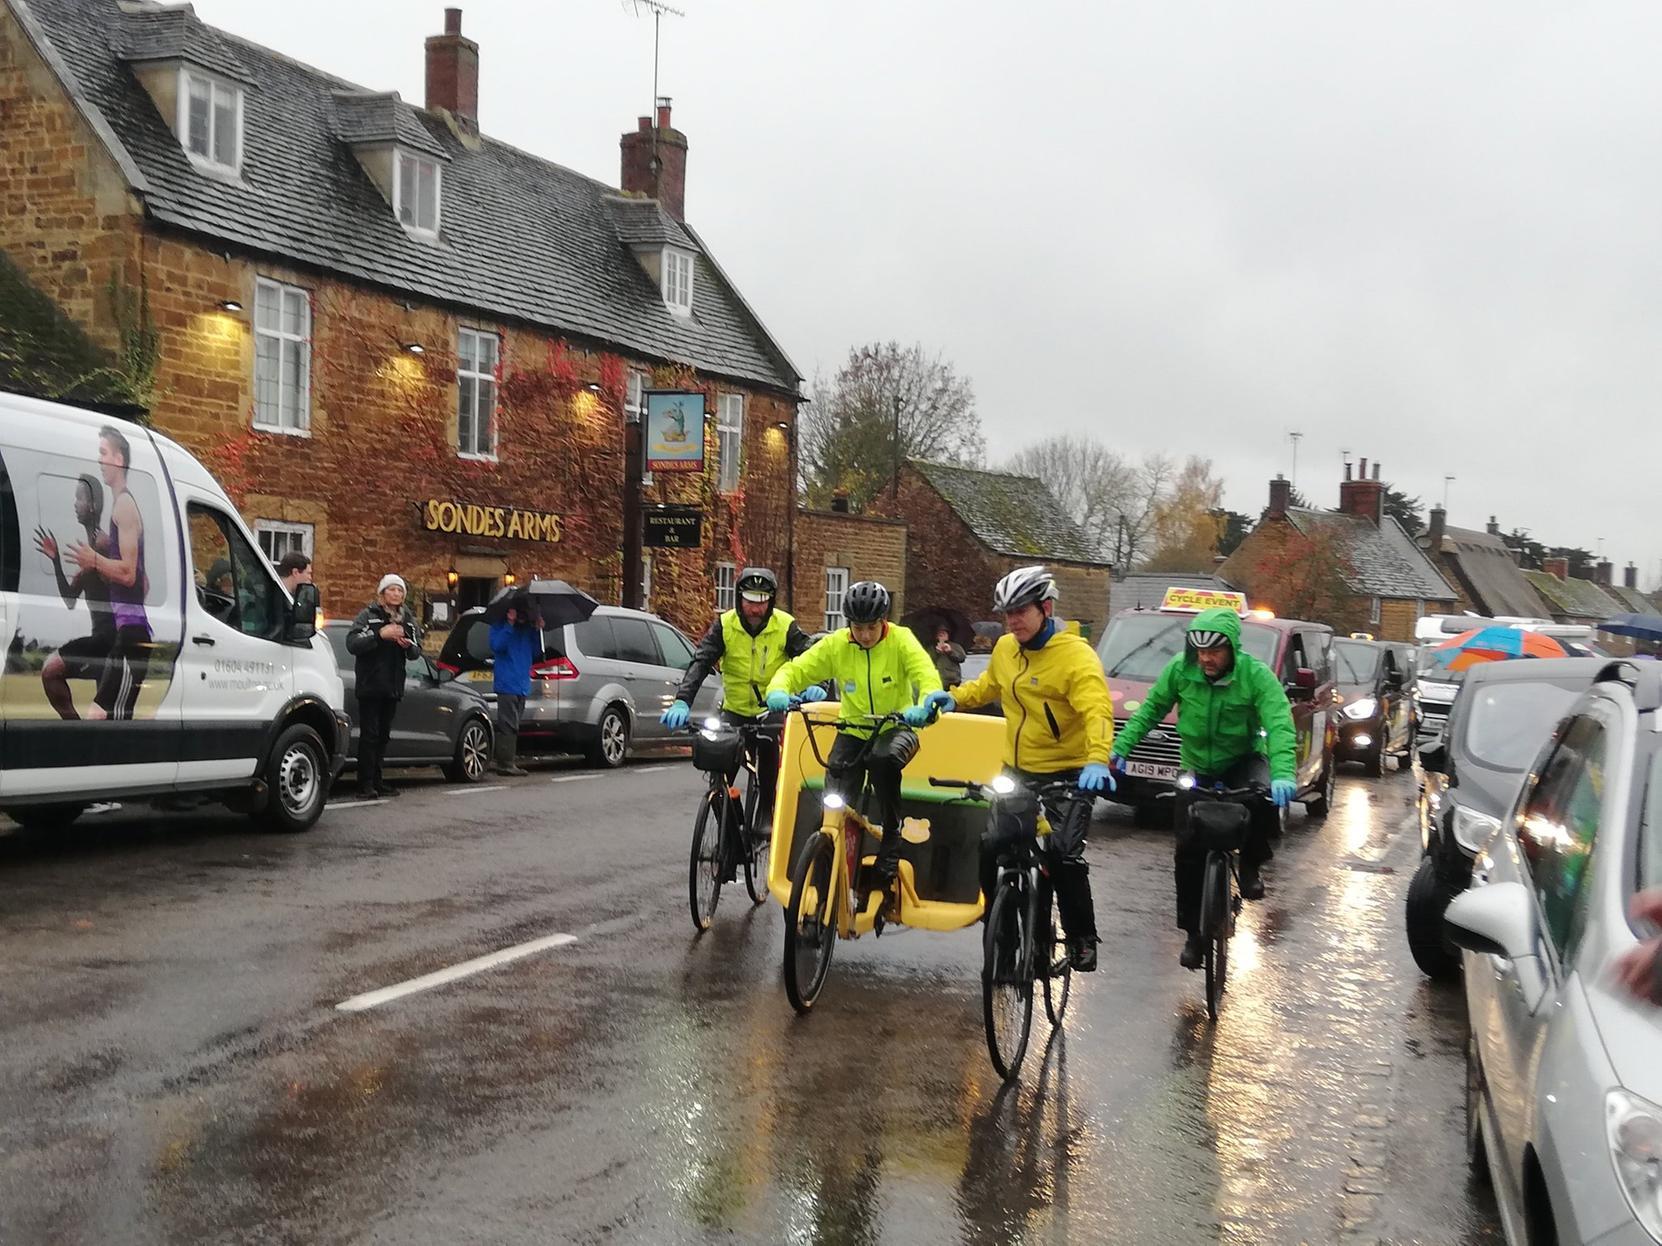 This photo was submitted by Mrs E on Twitter. One of the first places in Northants the Rickshaw team went through was Rockingham.